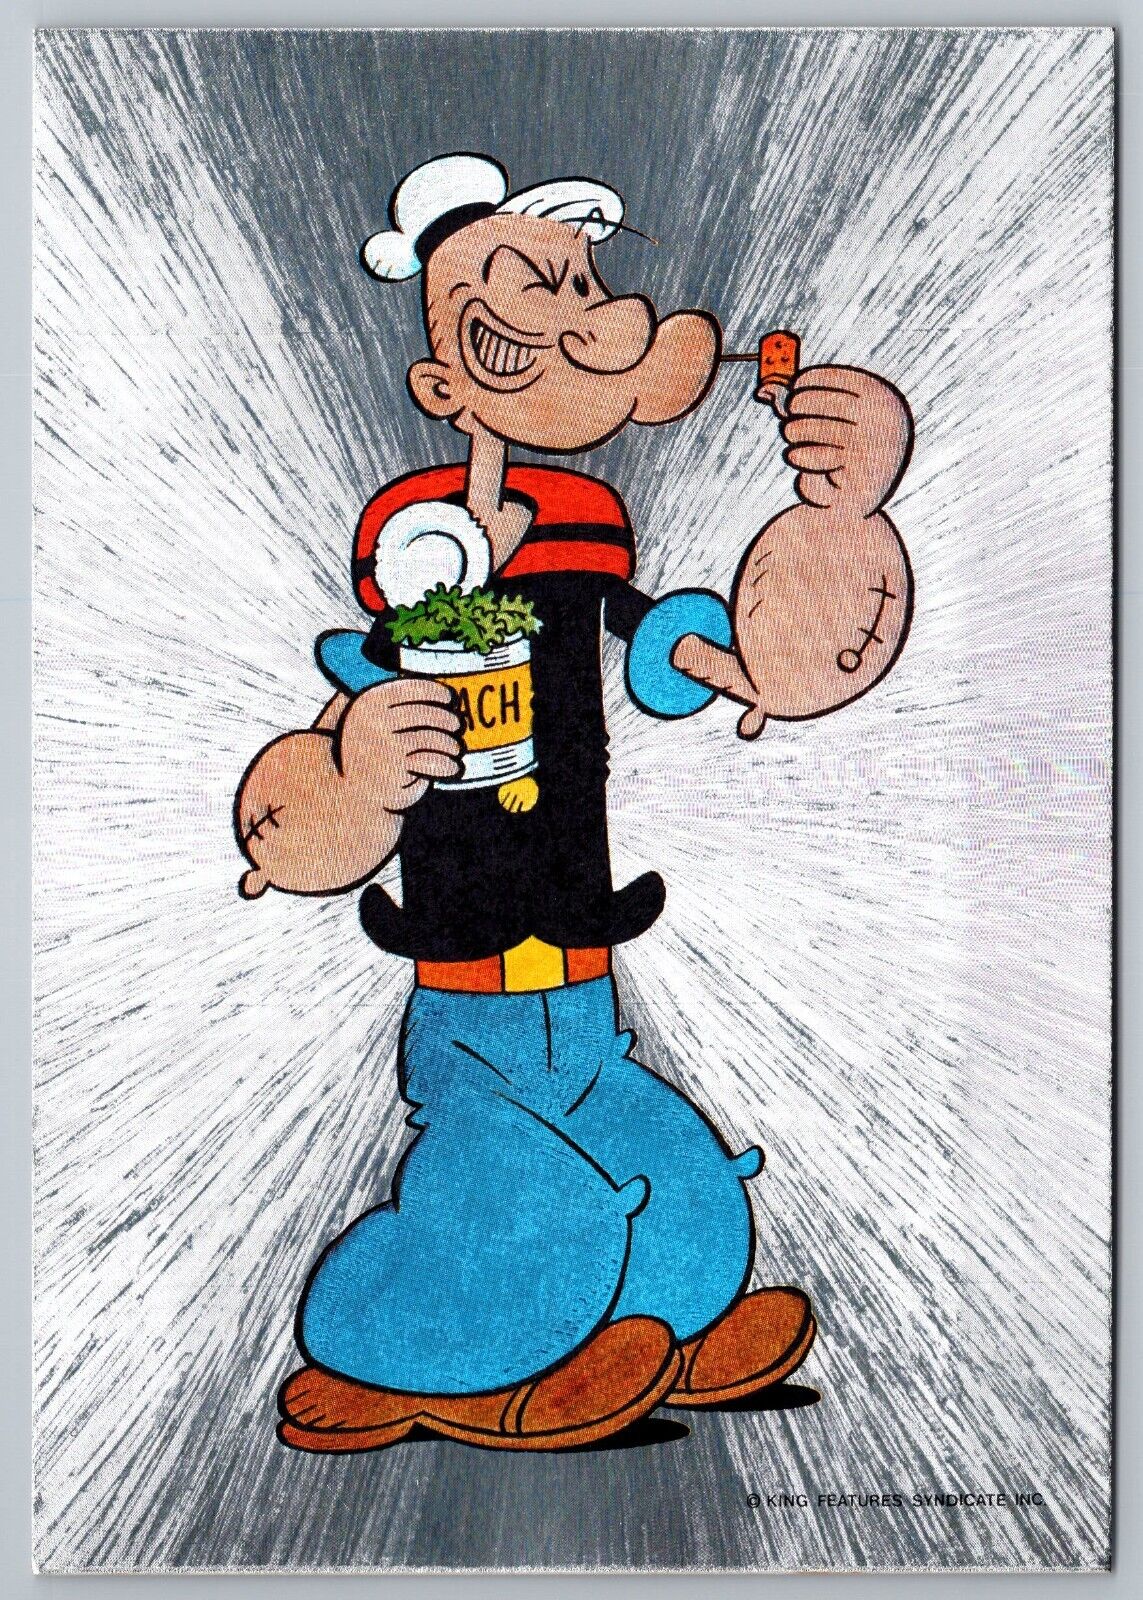 King Features syndicate Popeye Dufex foil unused postcard. Postcrossing